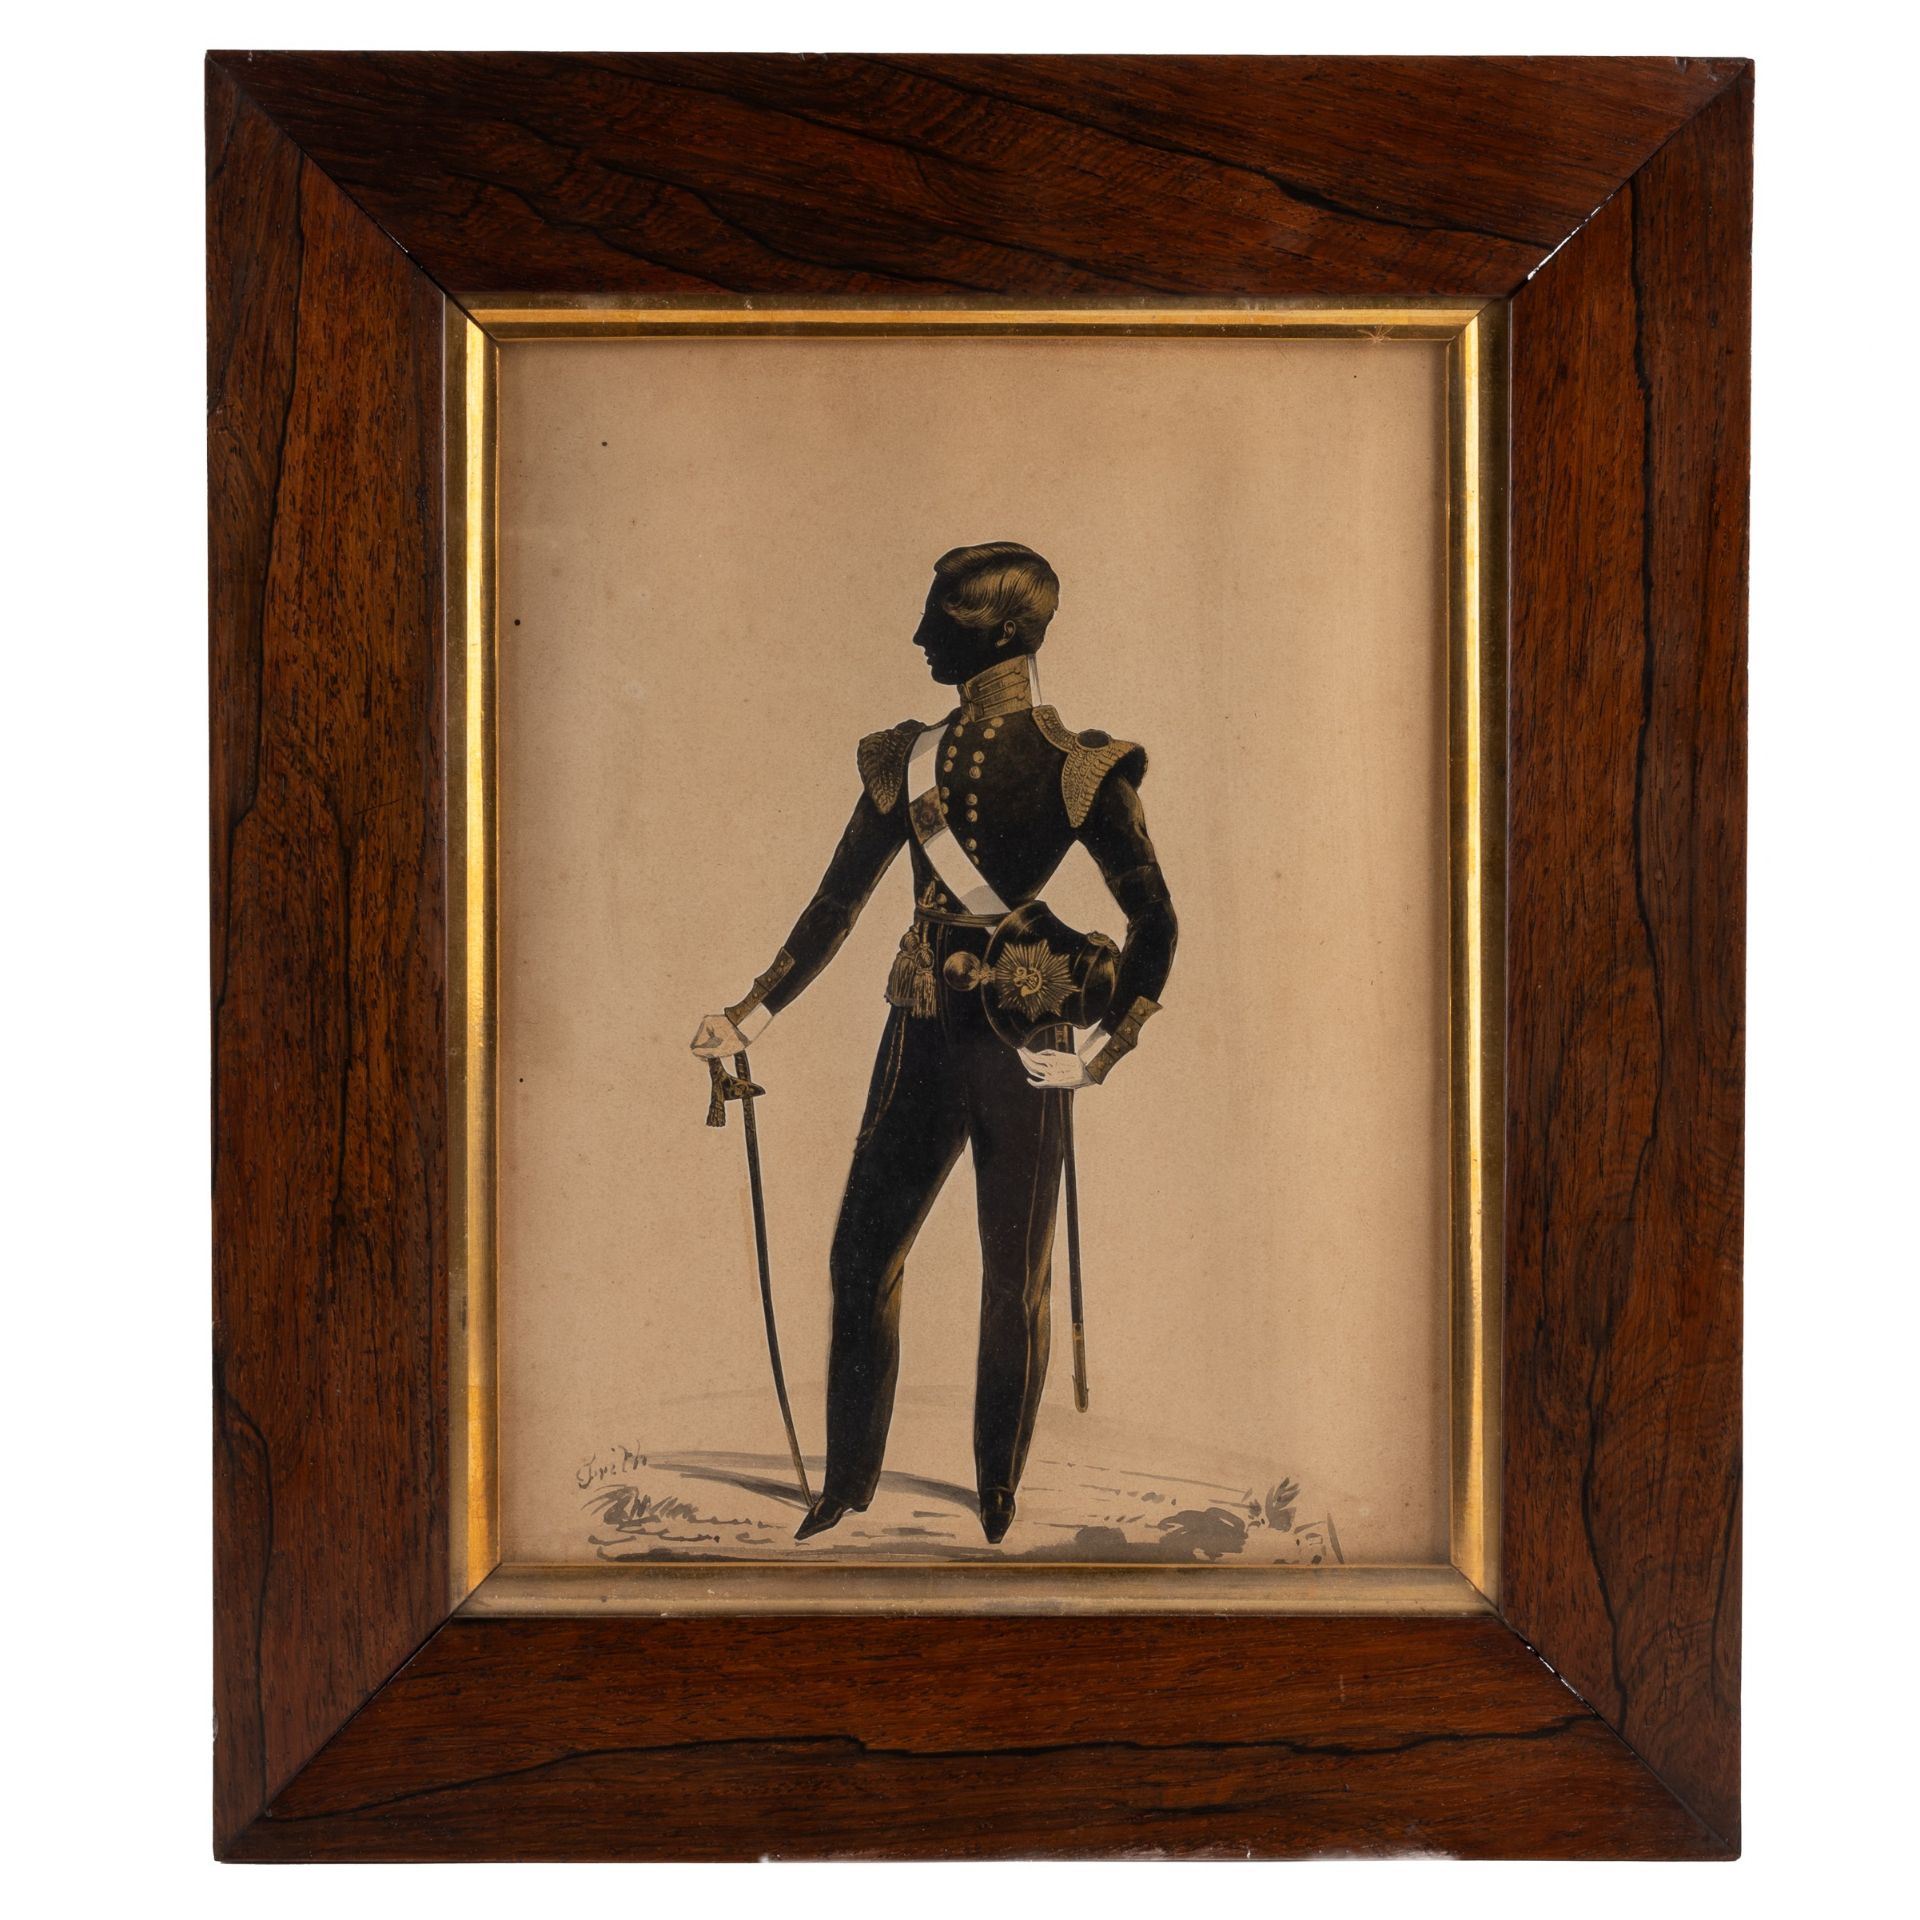 Henry Albert Frith (1837-1854) An officer, silhouette, 26cm x 20cm mounted in a period rosewood